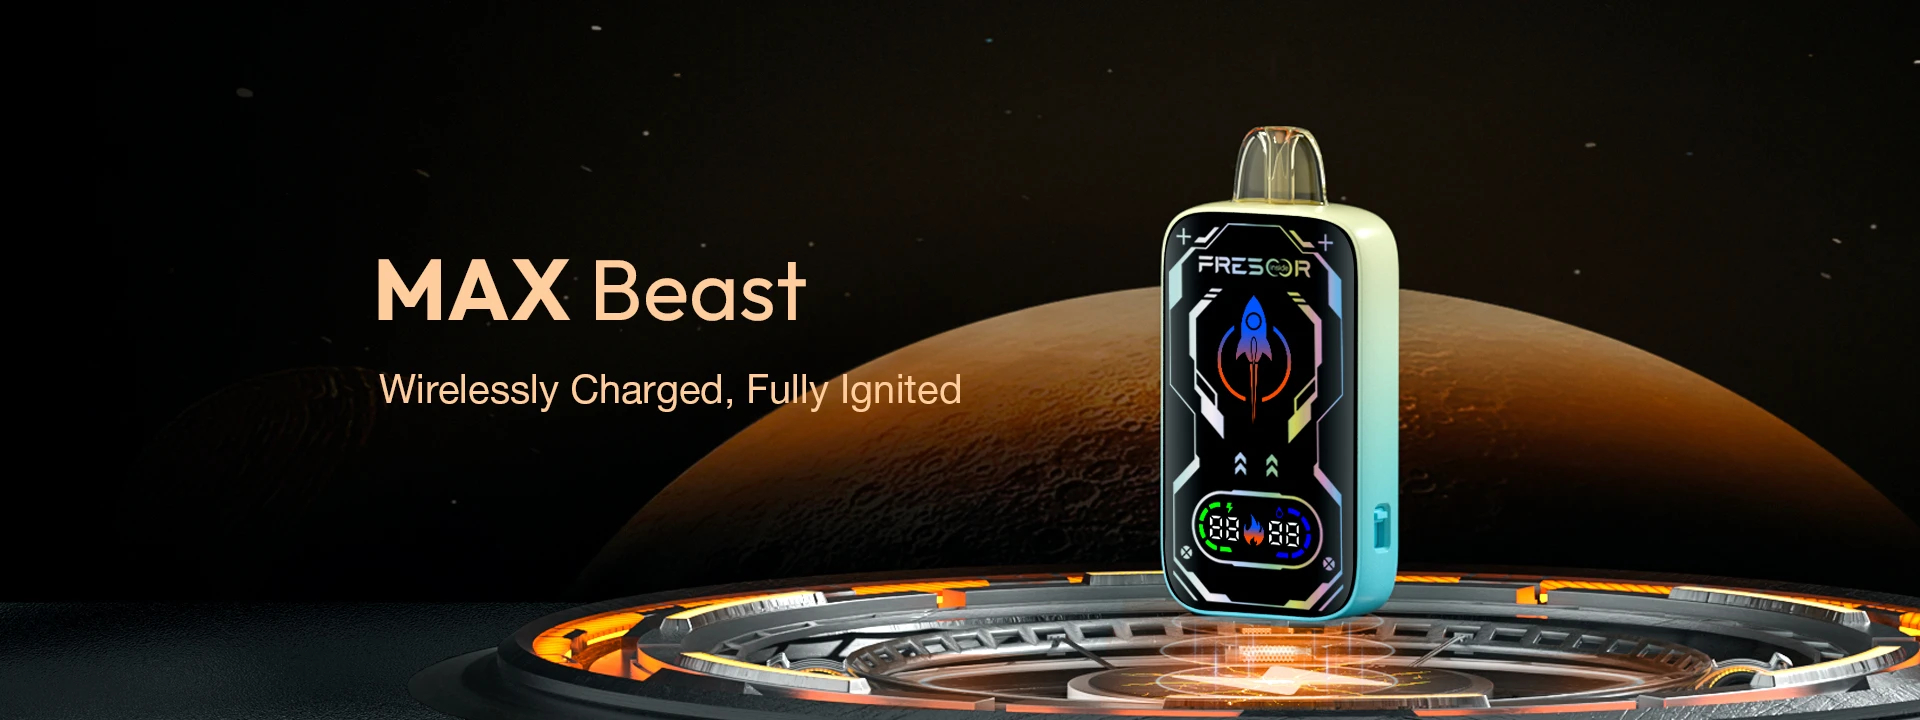 MAX Beast - Wirelessly Charged, Fully Ignited